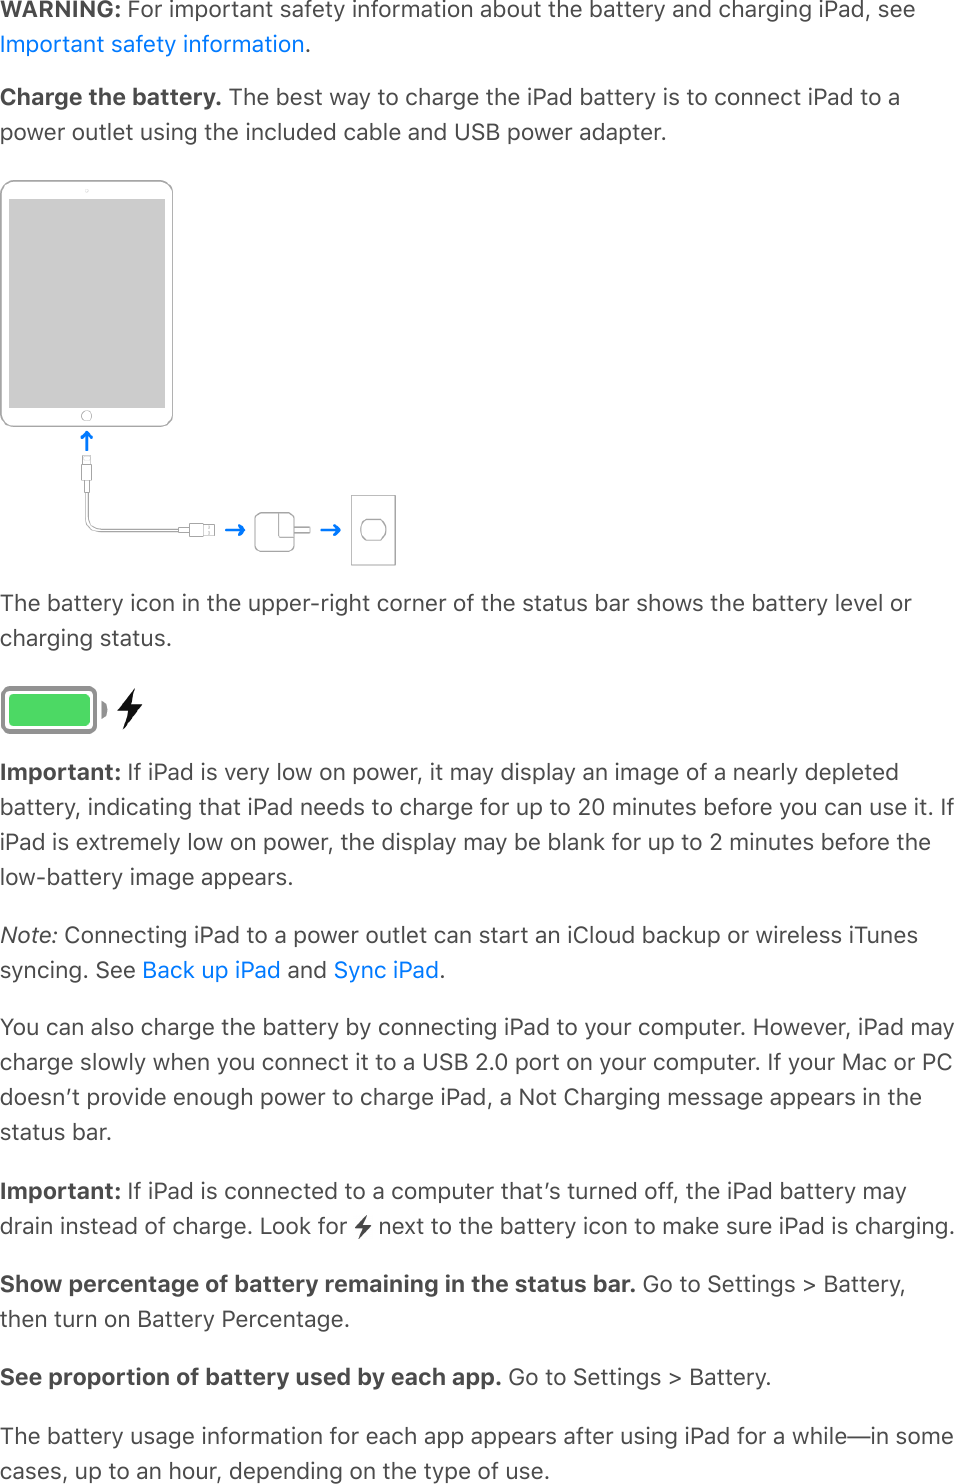 WARNING: For important safety information about the battery and charging iPad, see.Charge the battery. The best way to charge the iPad battery is to connect iPad to apower outlet using the included cable and USB power adapter.The battery icon in the upper-right corner of the status bar shows the battery level orcharging status.Important: If iPad is very low on power, it may display an image of a nearly depletedbattery, indicating that iPad needs to charge for up to 20 minutes before you can use it. IfiPad is extremely low on power, the display may be blank for up to 2 minutes before thelow-battery image appears.Note: Connecting iPad to a power outlet can start an iCloud backup or wireless iTunessyncing. See   and  .You can also charge the battery by connecting iPad to your computer. However, iPad maycharge slowly when you connect it to a USB 2.0 port on your computer. If your Mac or PCdoesnʼt provide enough power to charge iPad, a Not Charging message appears in thestatus bar.Important: If iPad is connected to a computer thatʼs turned off, the iPad battery maydrain instead of charge. Look for   next to the battery icon to make sure iPad is charging.Show percentage of battery remaining in the status bar. Go to Settings &gt; Battery,then turn on Battery Percentage.See proportion of battery used by each app. Go to Settings &gt; Battery.The battery usage information for each app appears after using iPad for a while—in somecases, up to an hour, depending on the type of use.Important safety informationBack up iPad Sync iPad